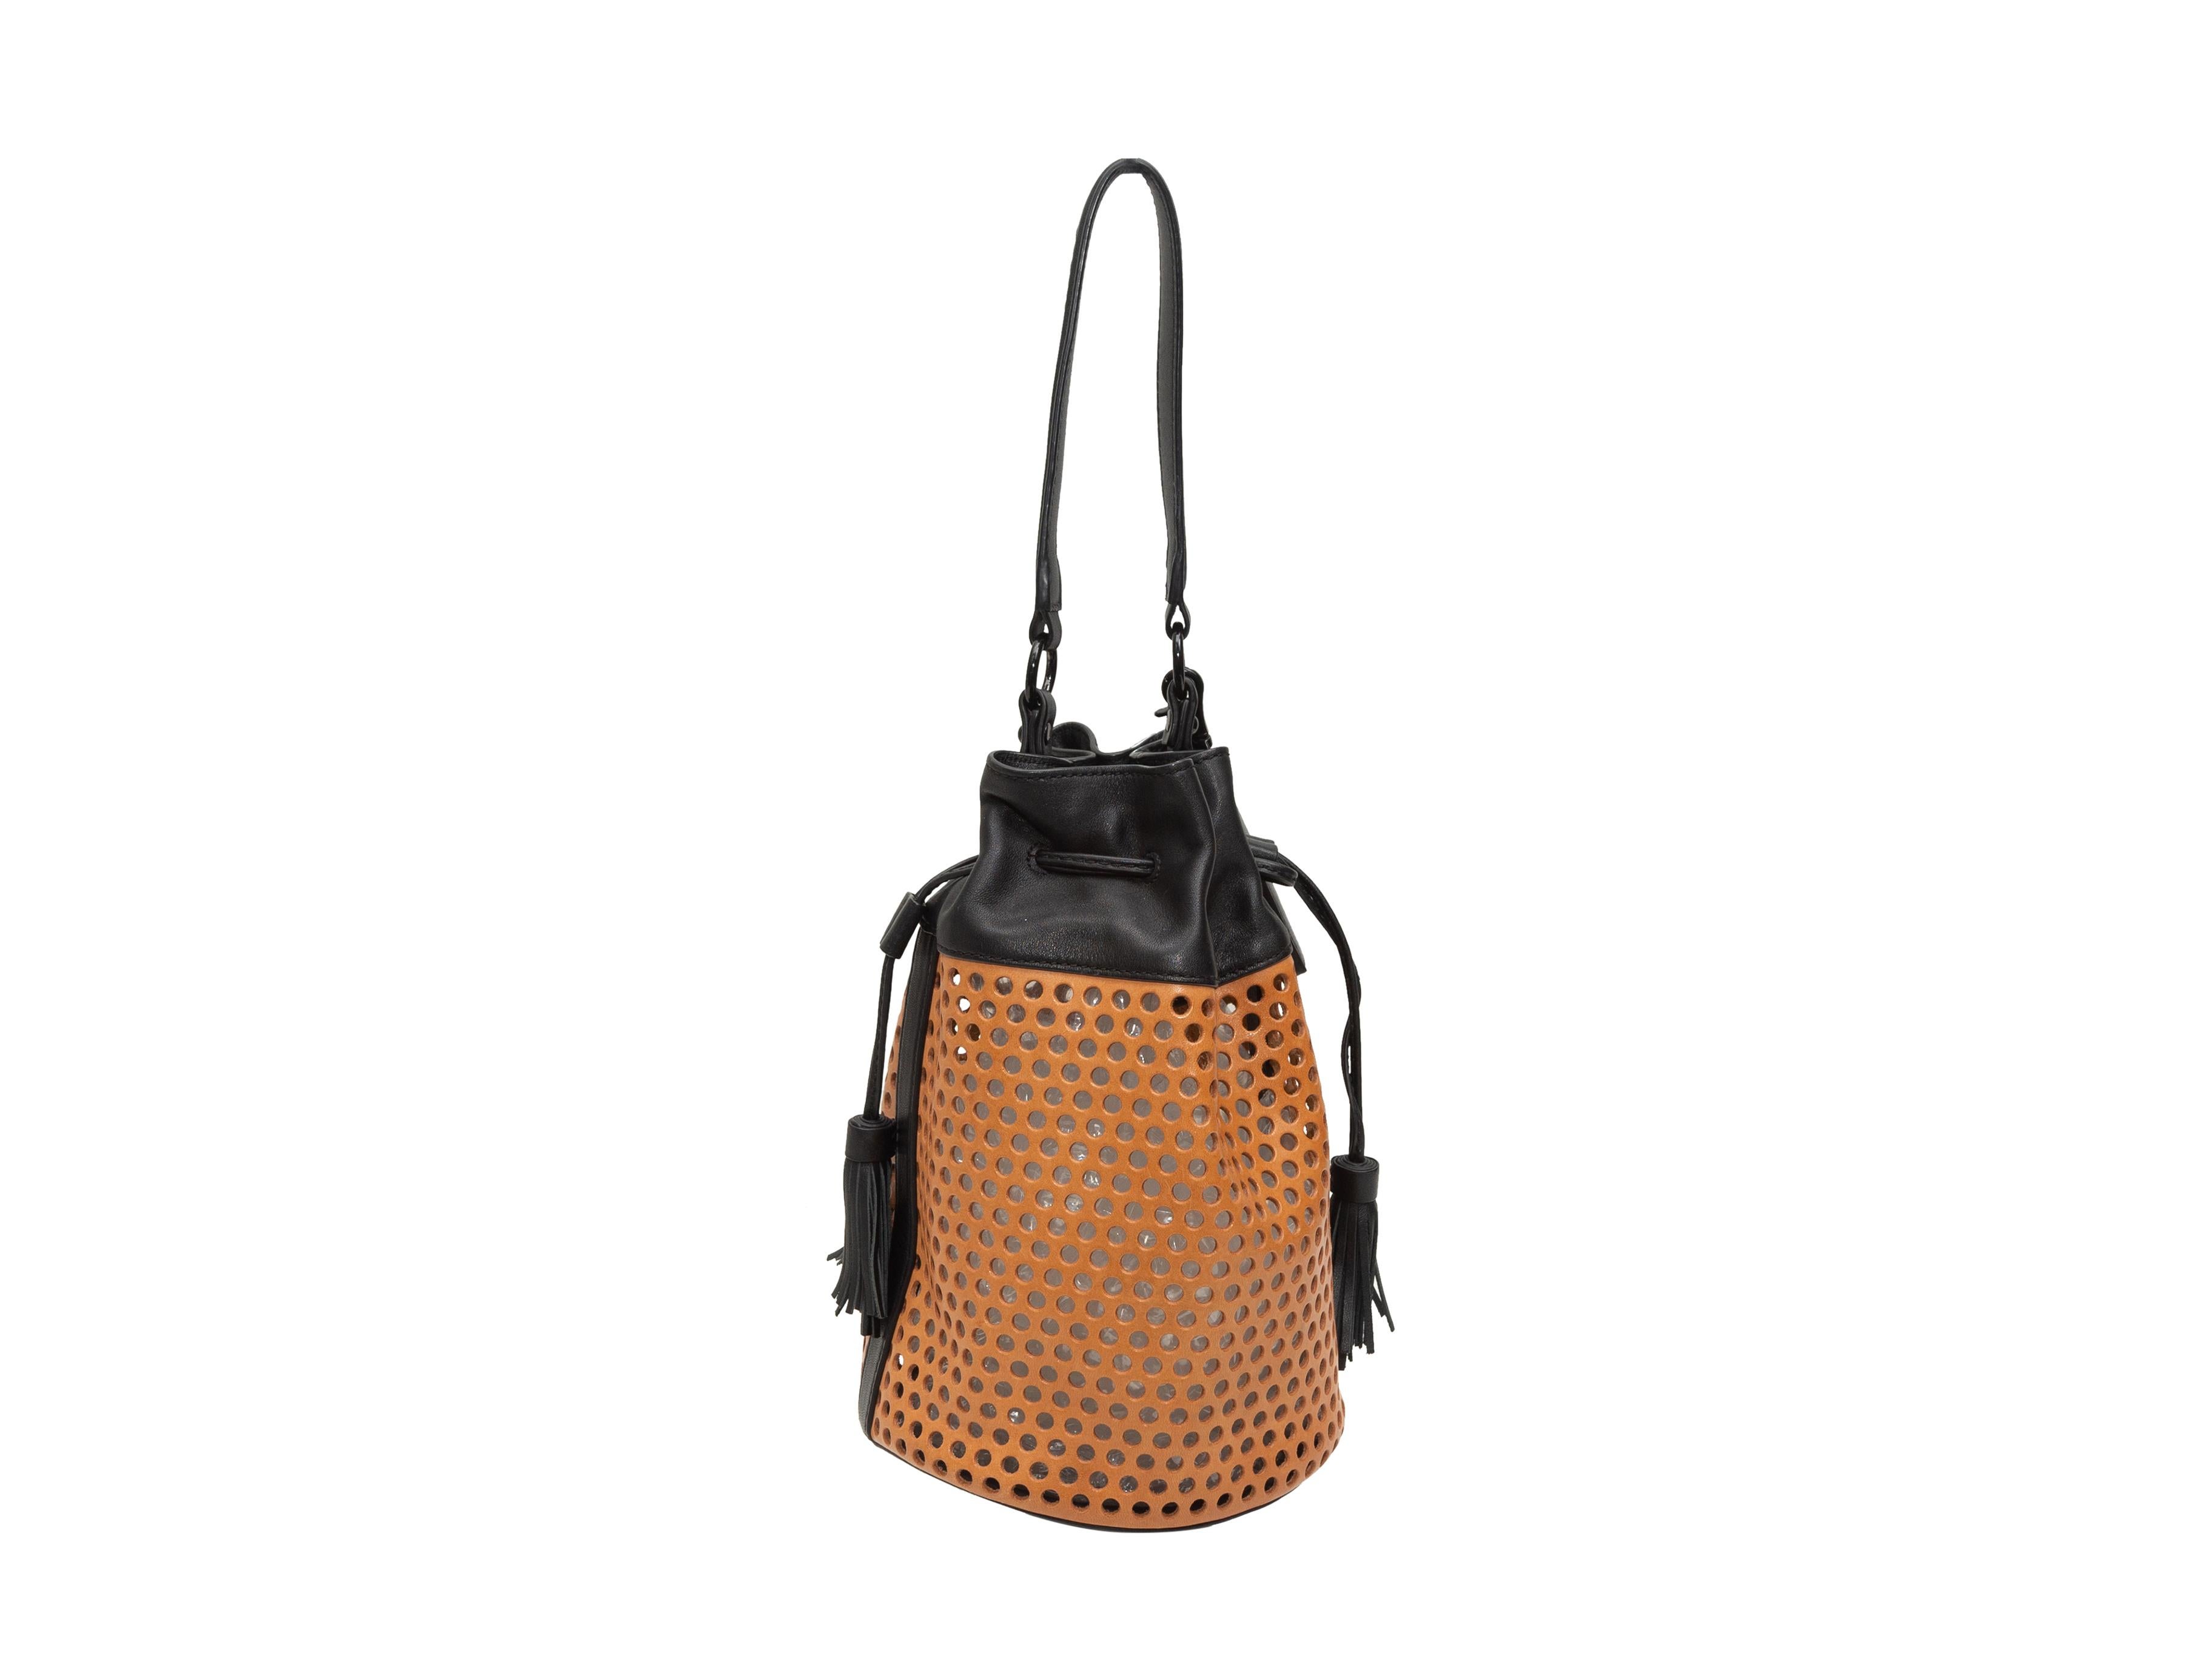 Product details: Tan & Black Loeffler Randall Perforated Leather Bucket Bag. This bag features a leather body, black hardware, a single flat handle, optional shoulder strap, and a drawstring closure at the top. 9